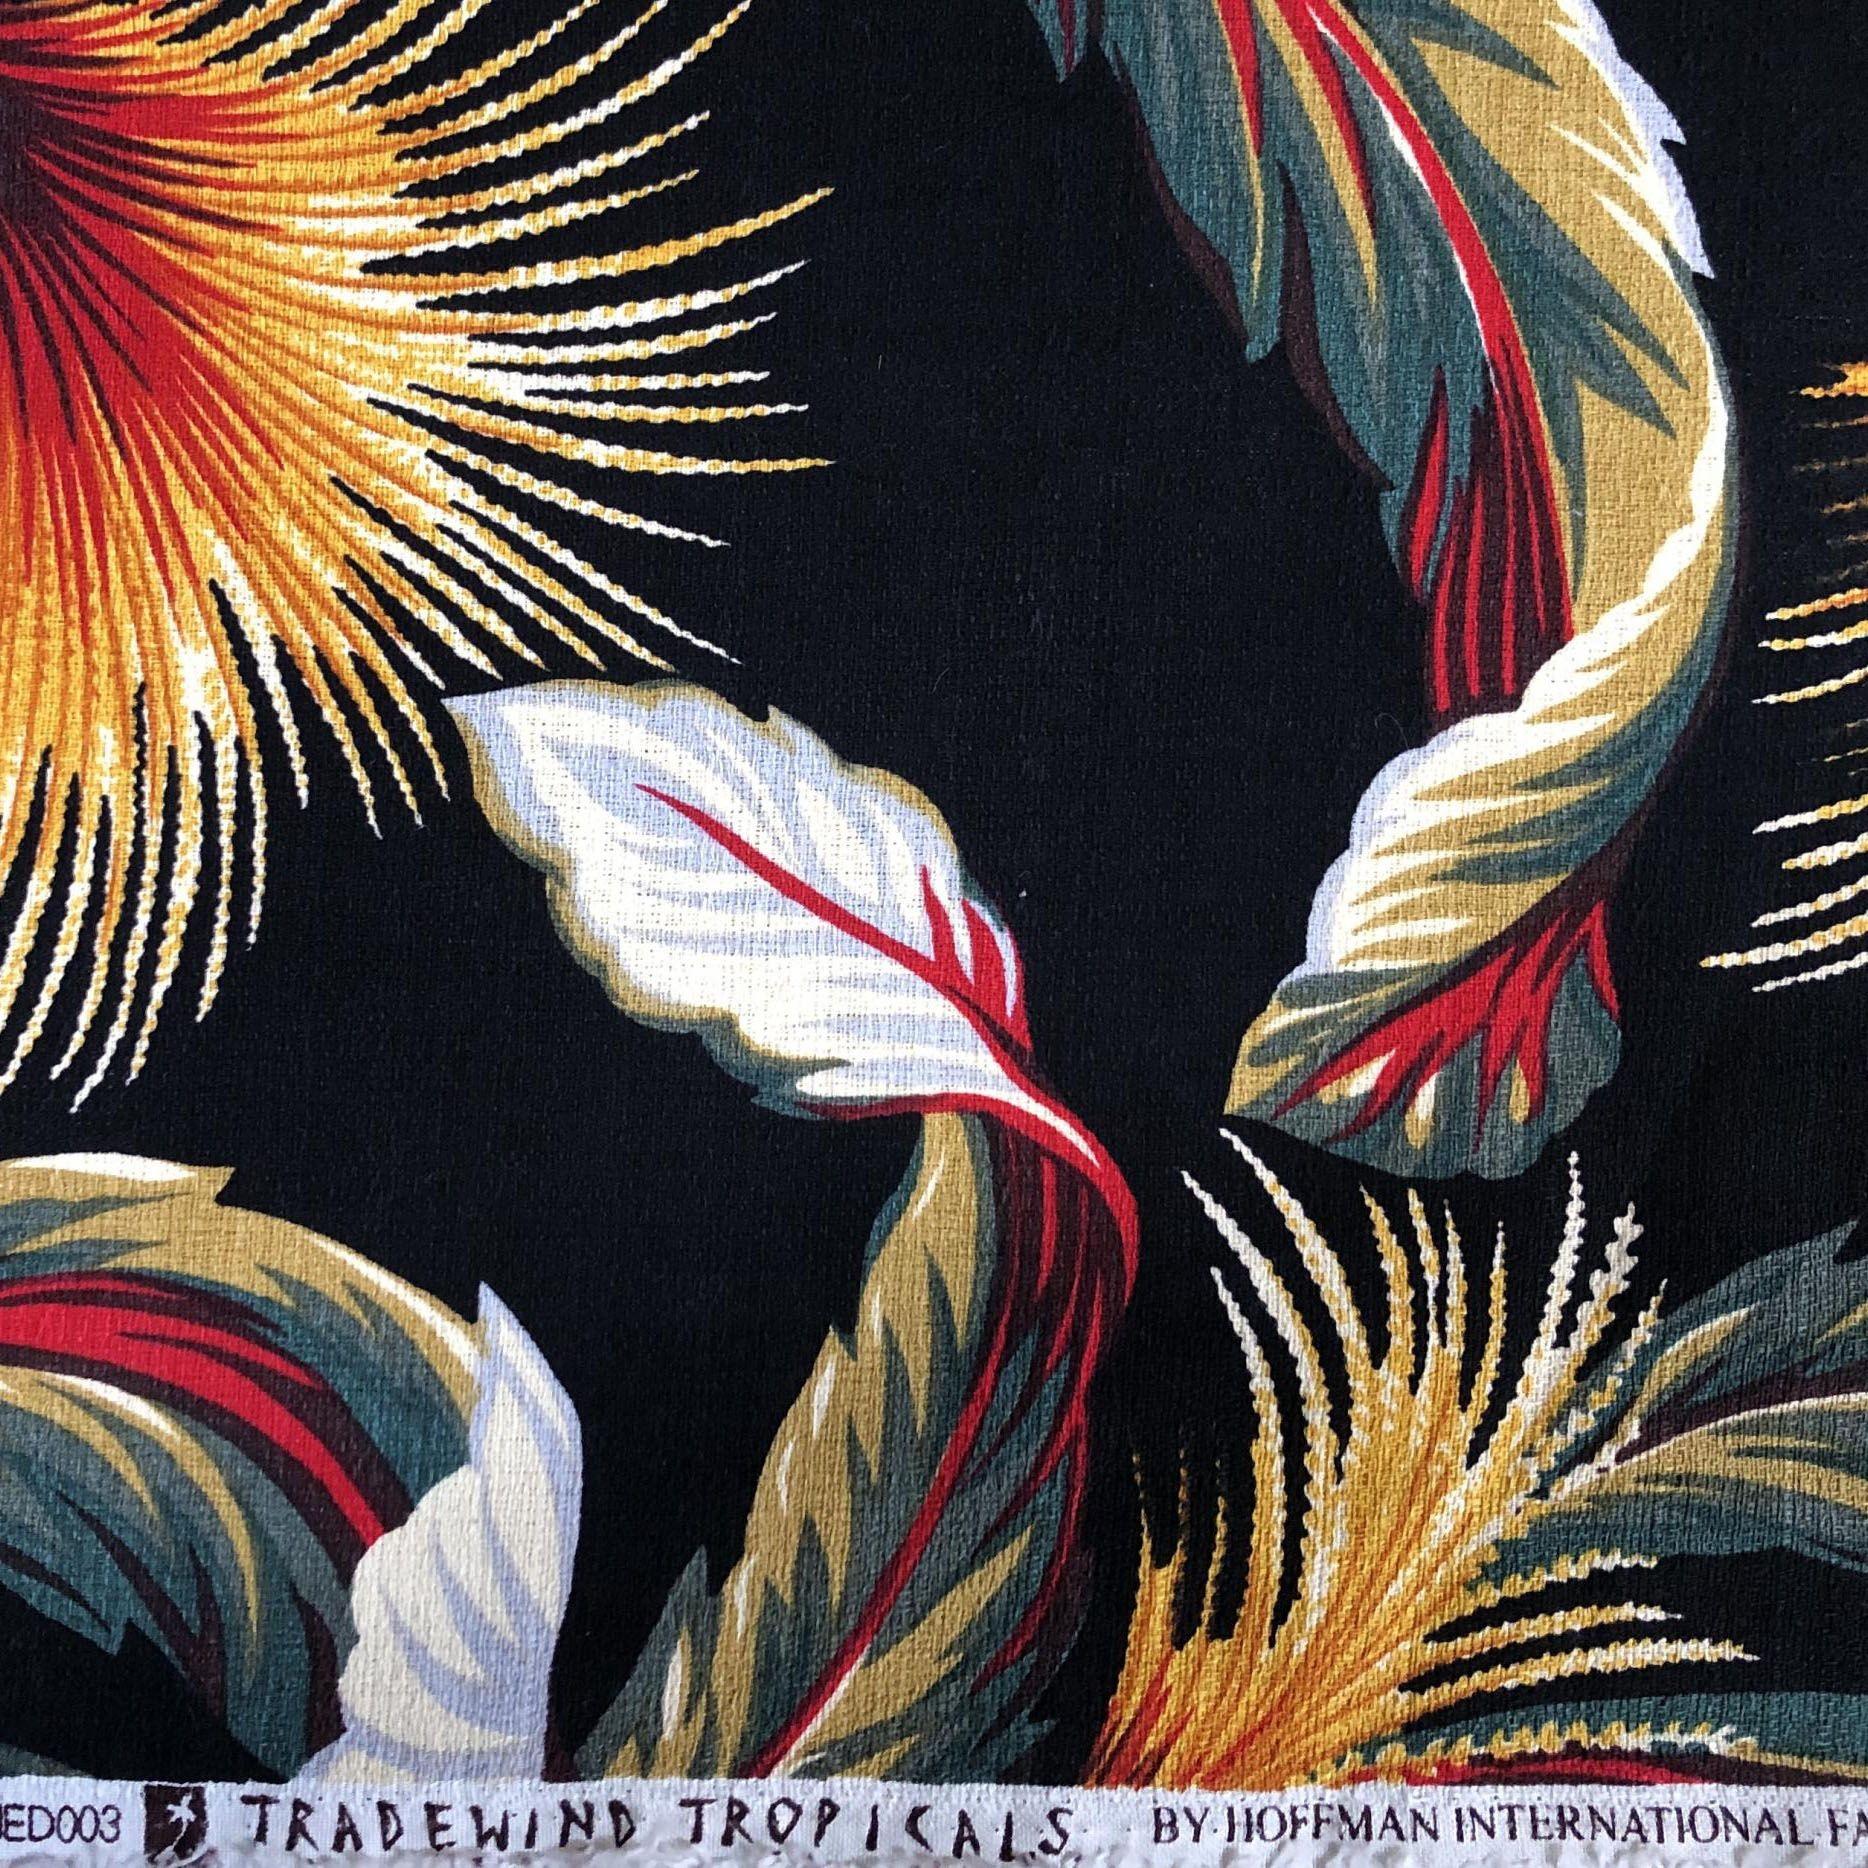 American VTG 2001 Printed Cotton Fabric by Tradewind Tropicals Ft. Tropical Flower Design For Sale